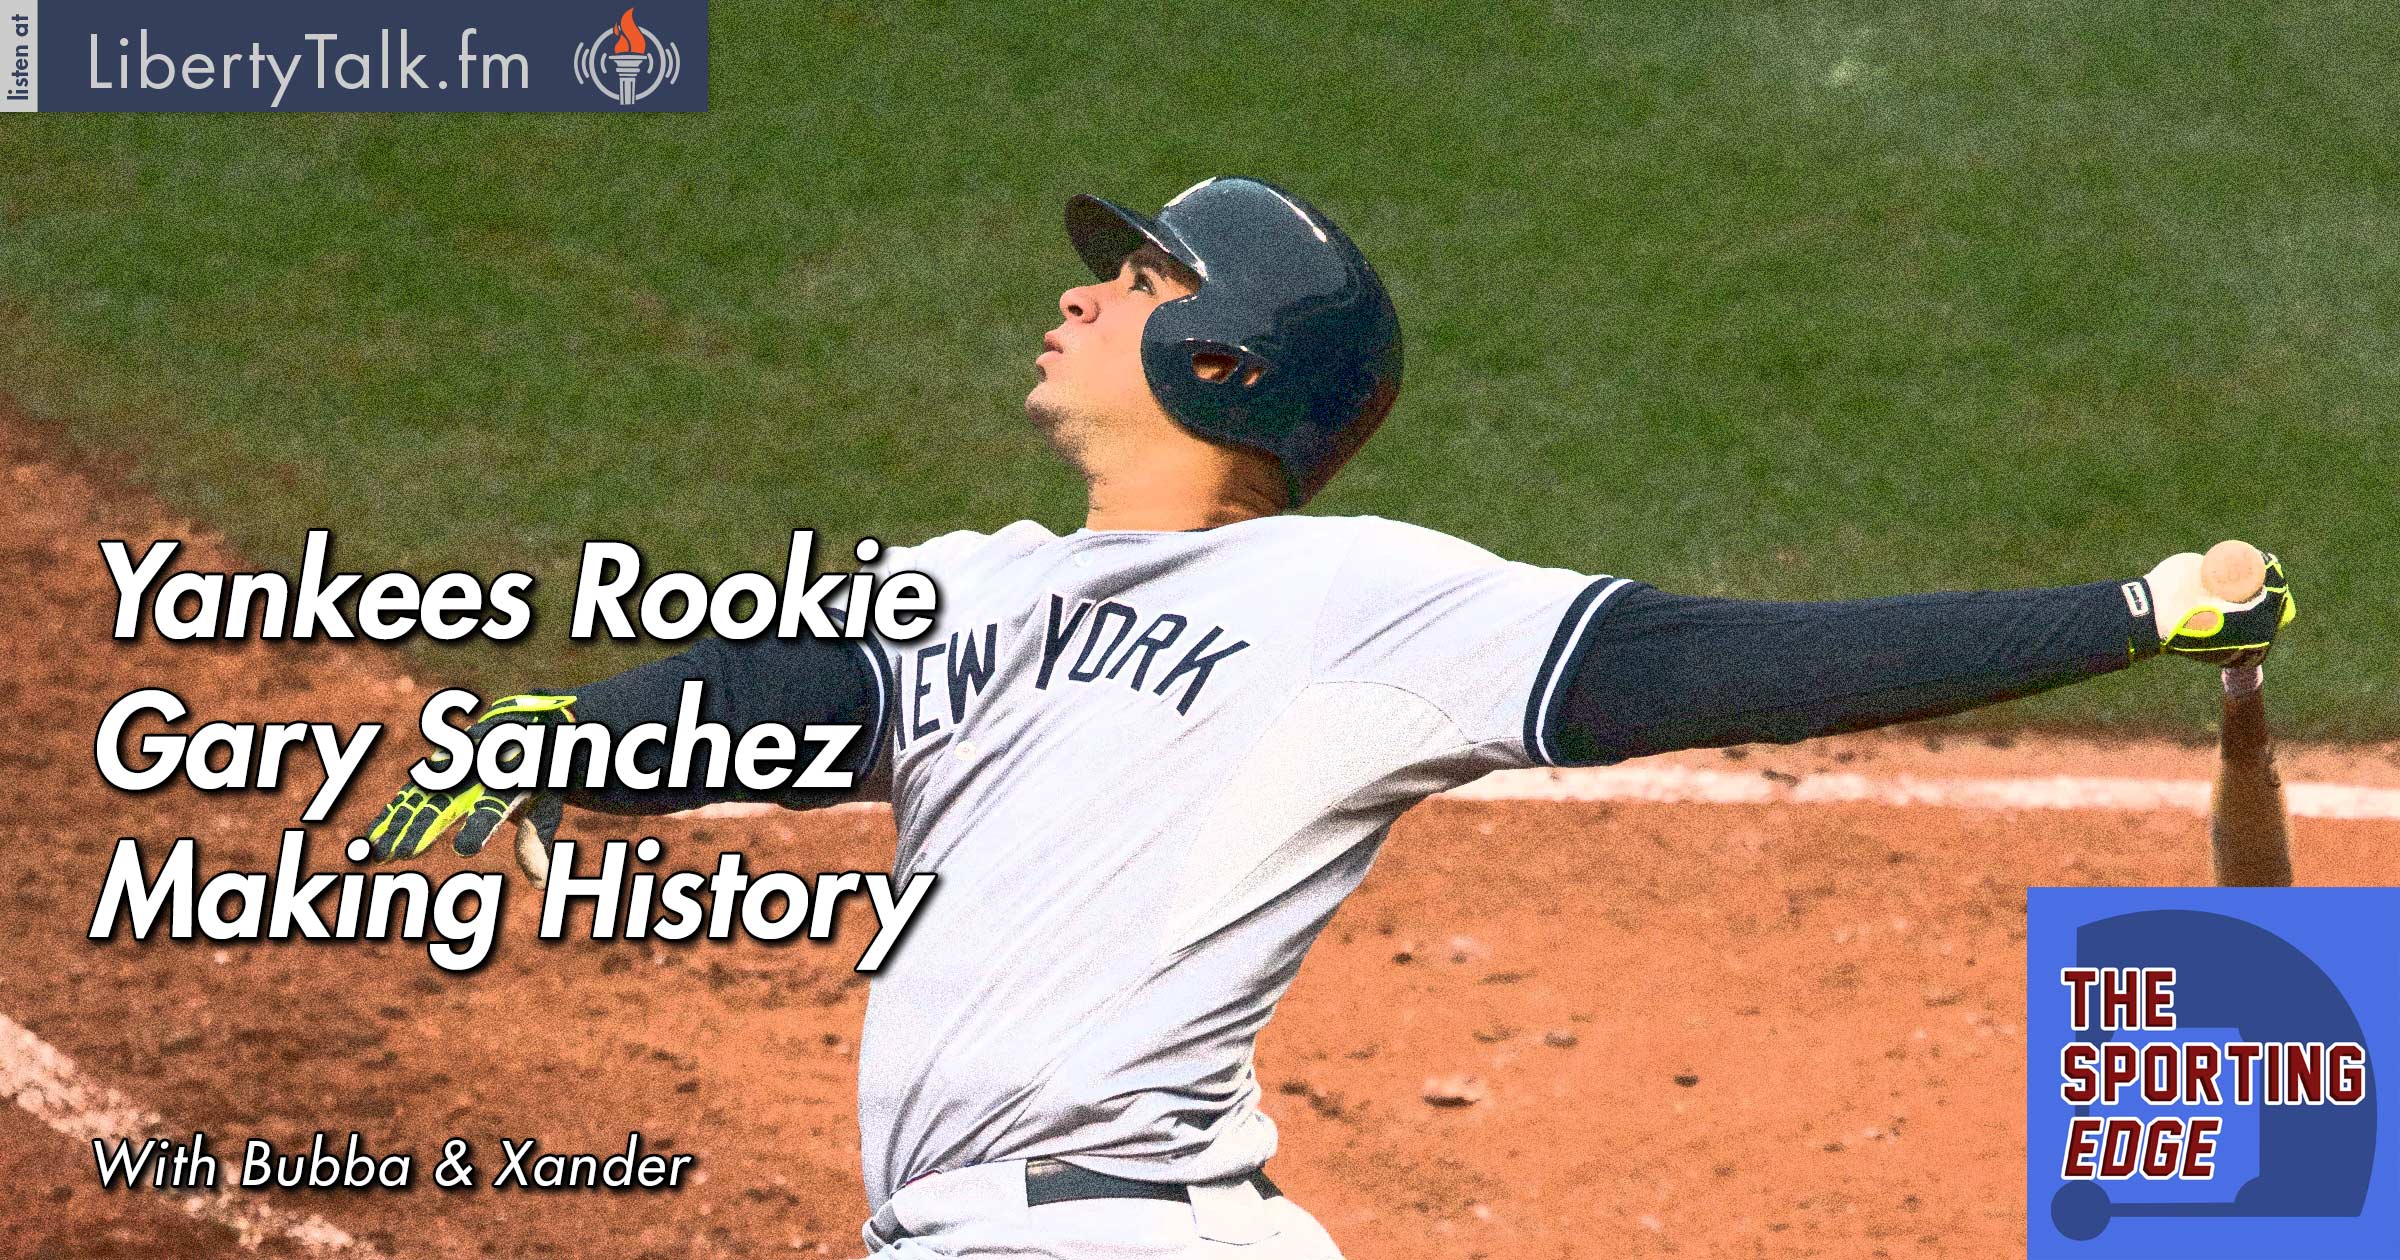 Yankees Rookie Gary Sanchez Making History - The Sporting Edge